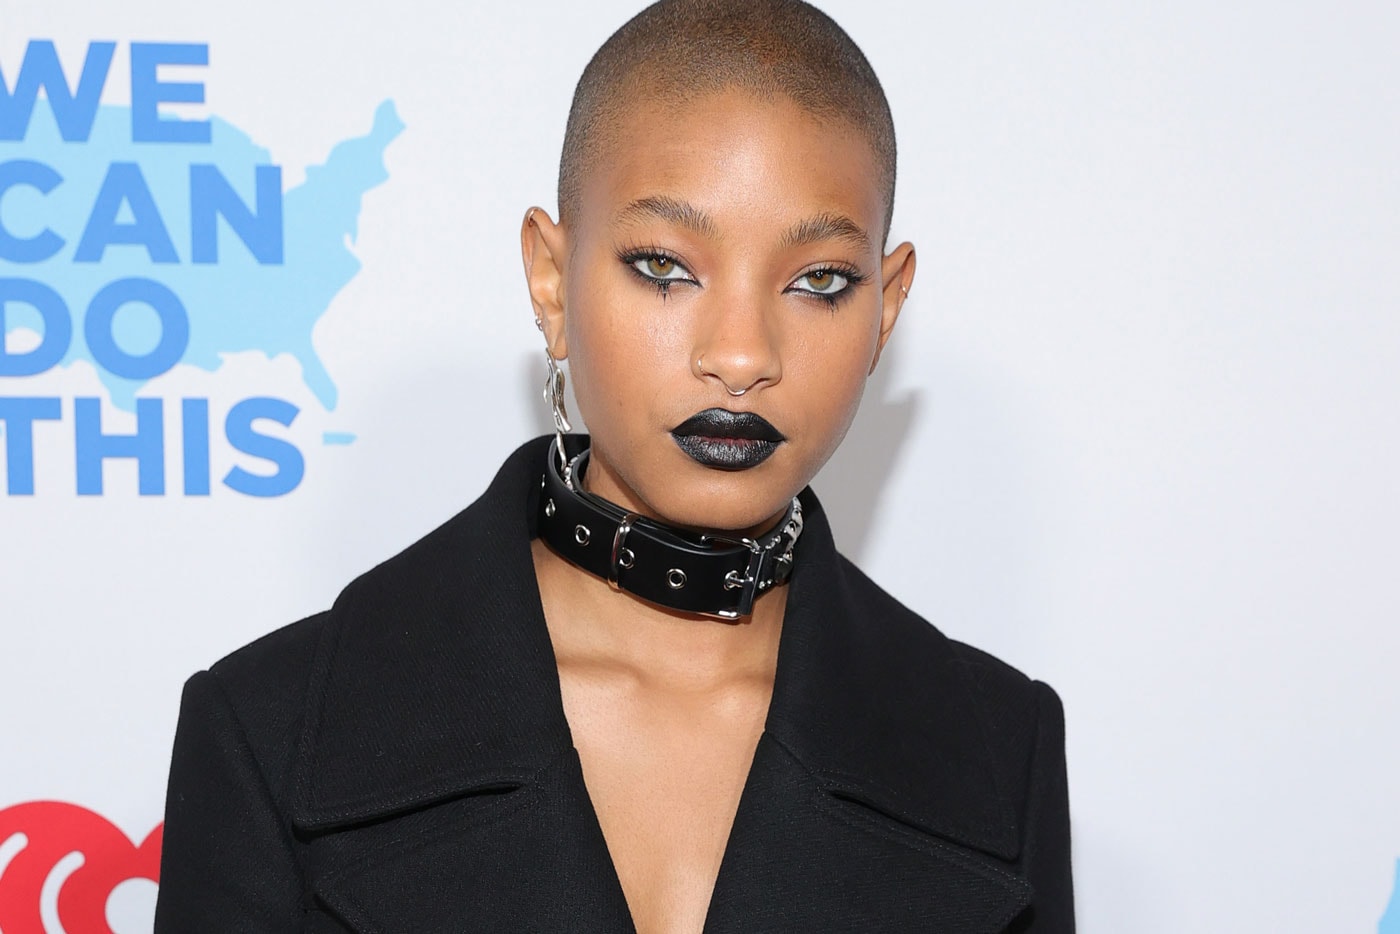 Willow Smith Shares New Song "Luv You"